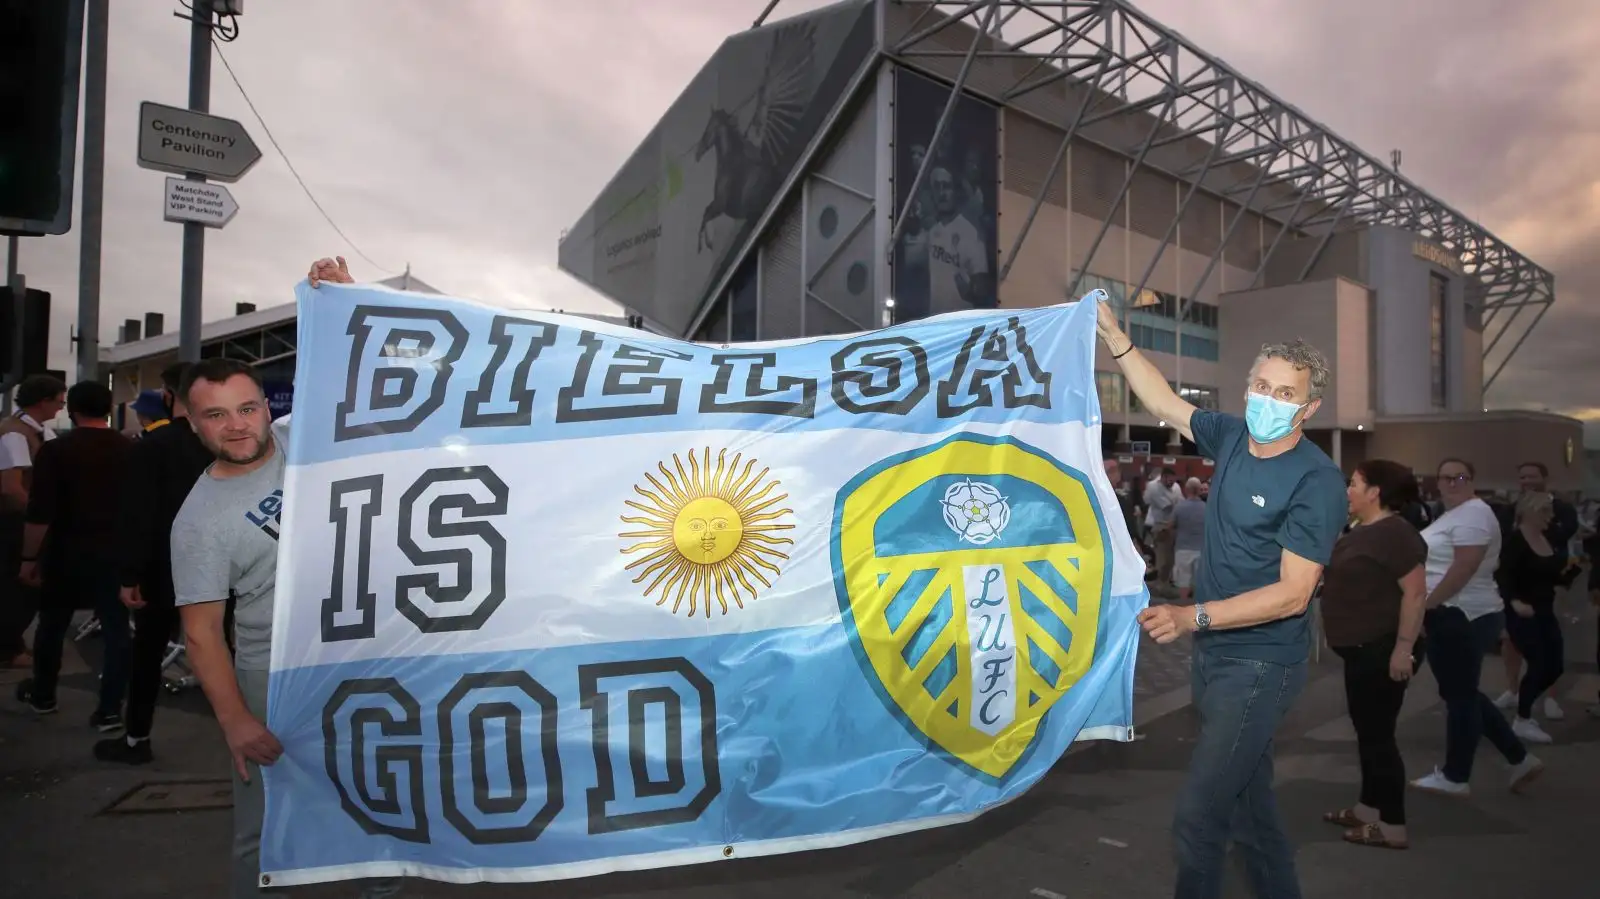 Leeds supporters hold a banner